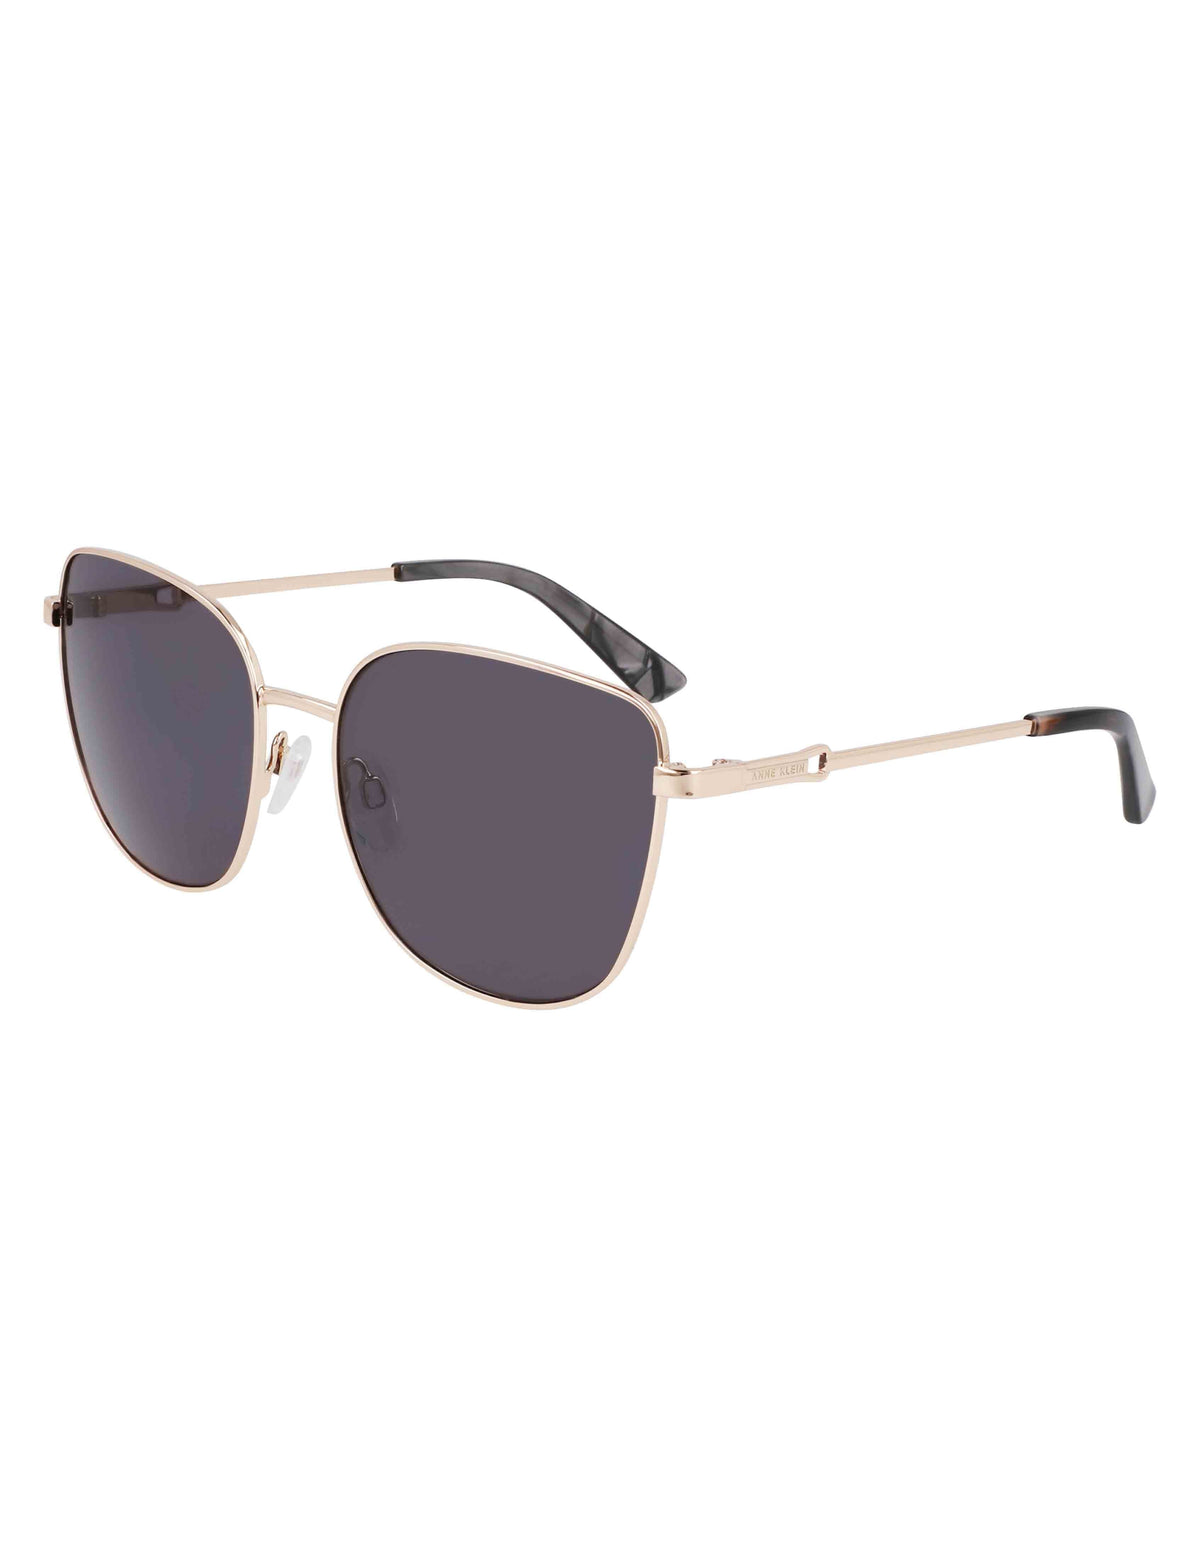 Anne Klein GOLD Uplifting Oversized Square Sunglasses